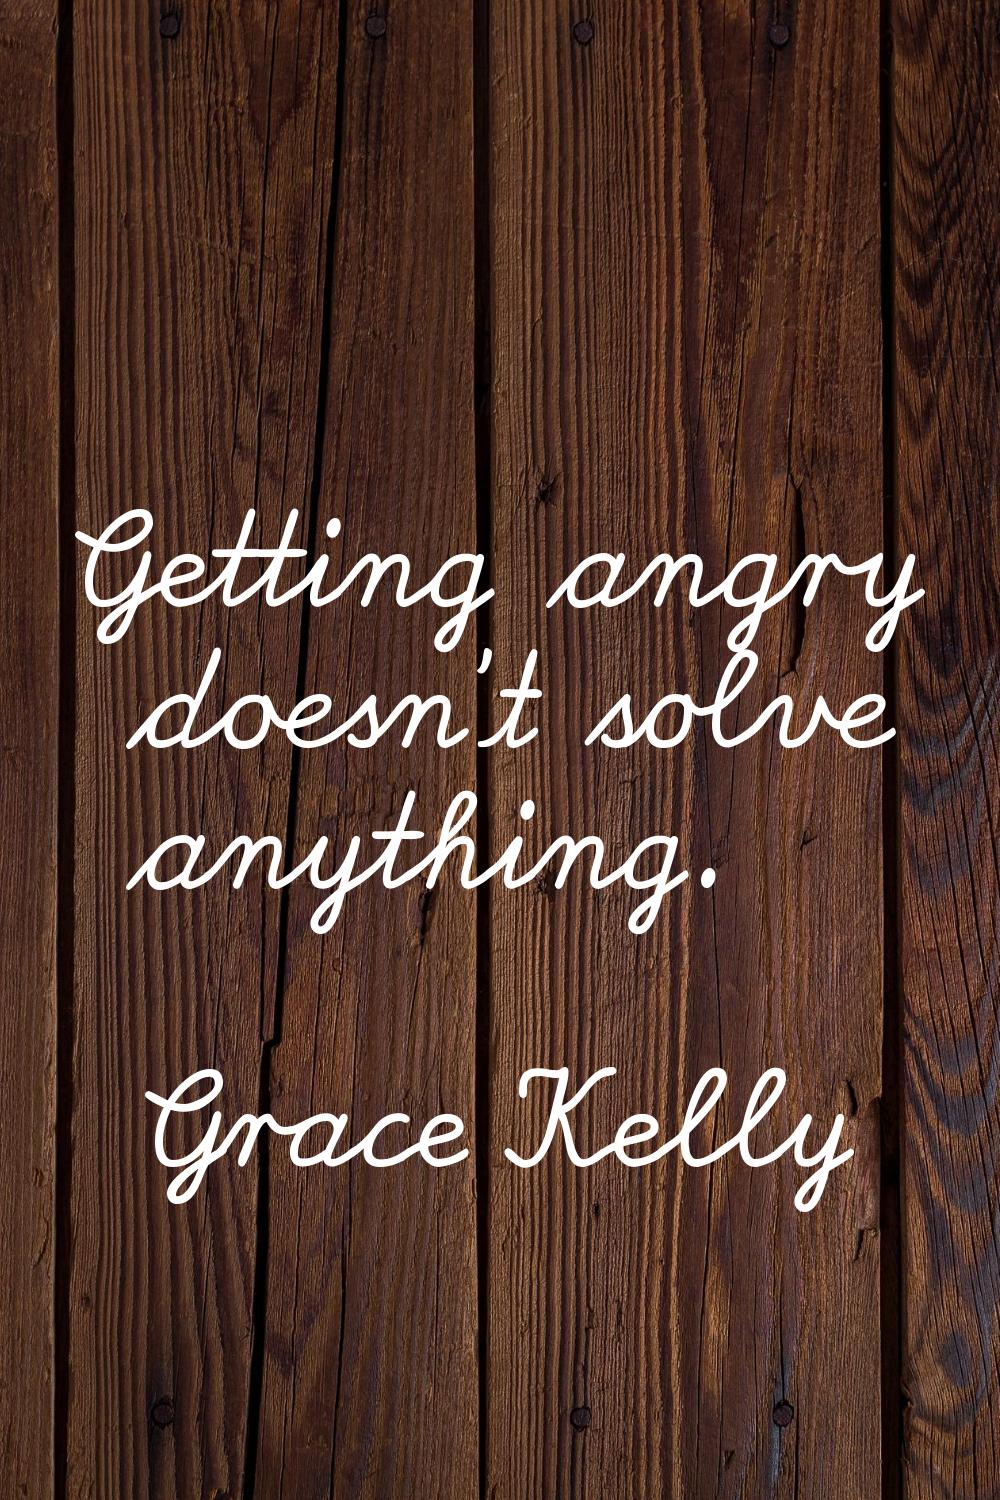 Getting angry doesn't solve anything.